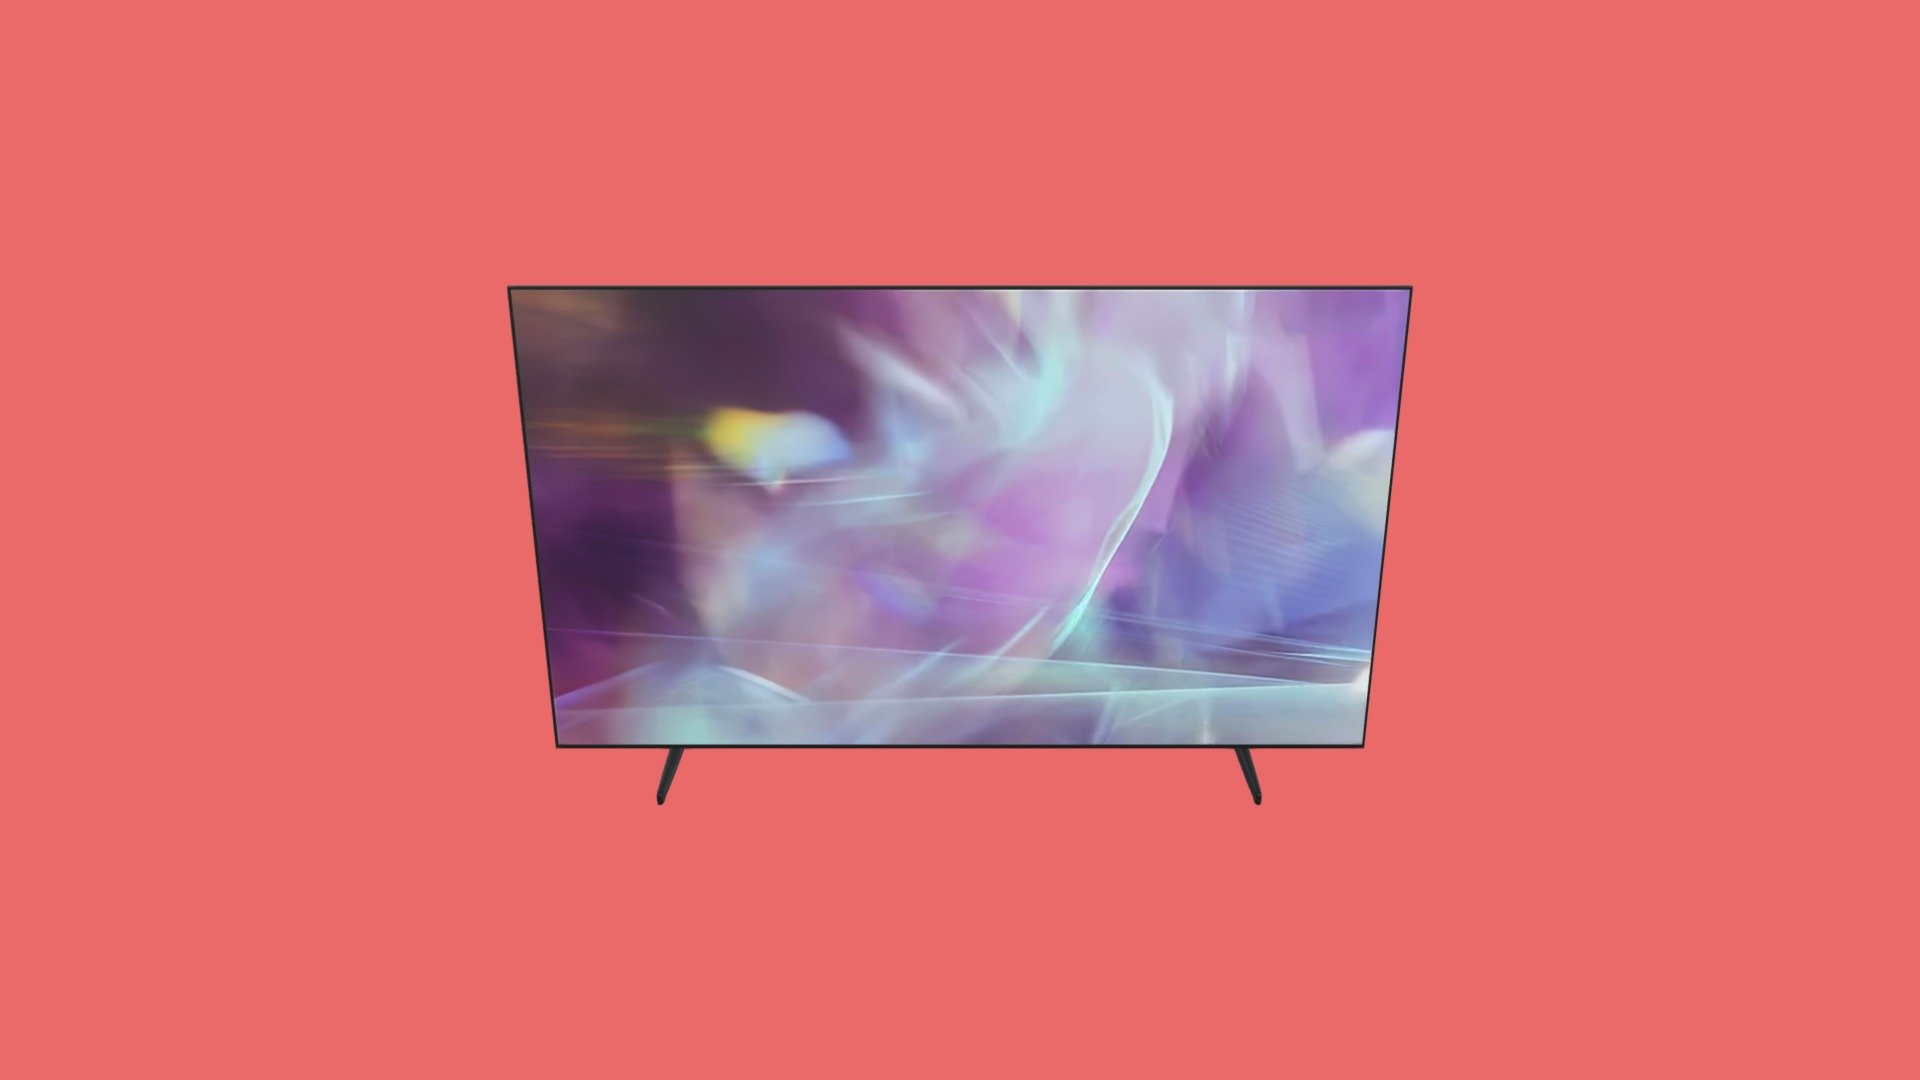 A low to mid poly, high detailed model of a Smart Flat TV screen created for easy use in your project. 

The model is based on Samsung Q60A 75